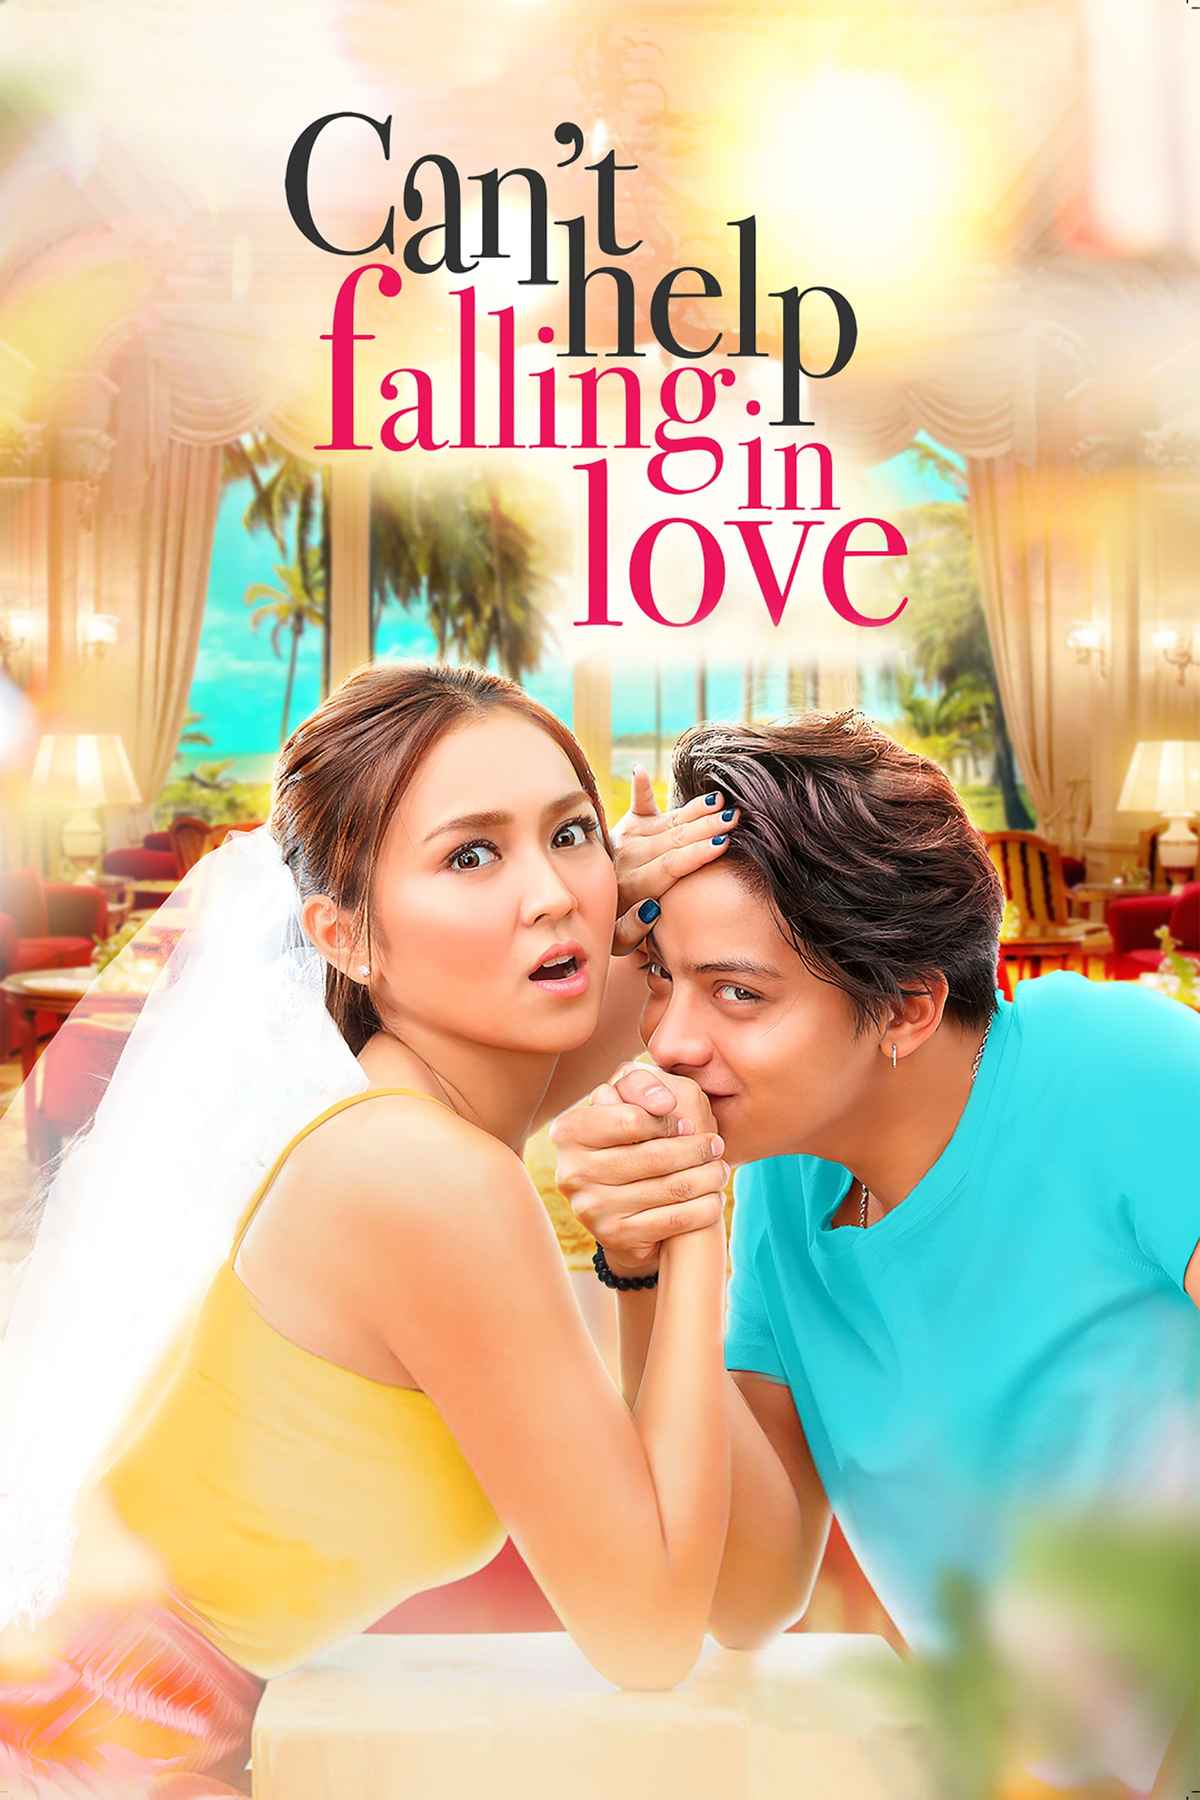 Can T Help Falling In Love Movie 2017 Release Date Cast Trailer Songs Streaming Online